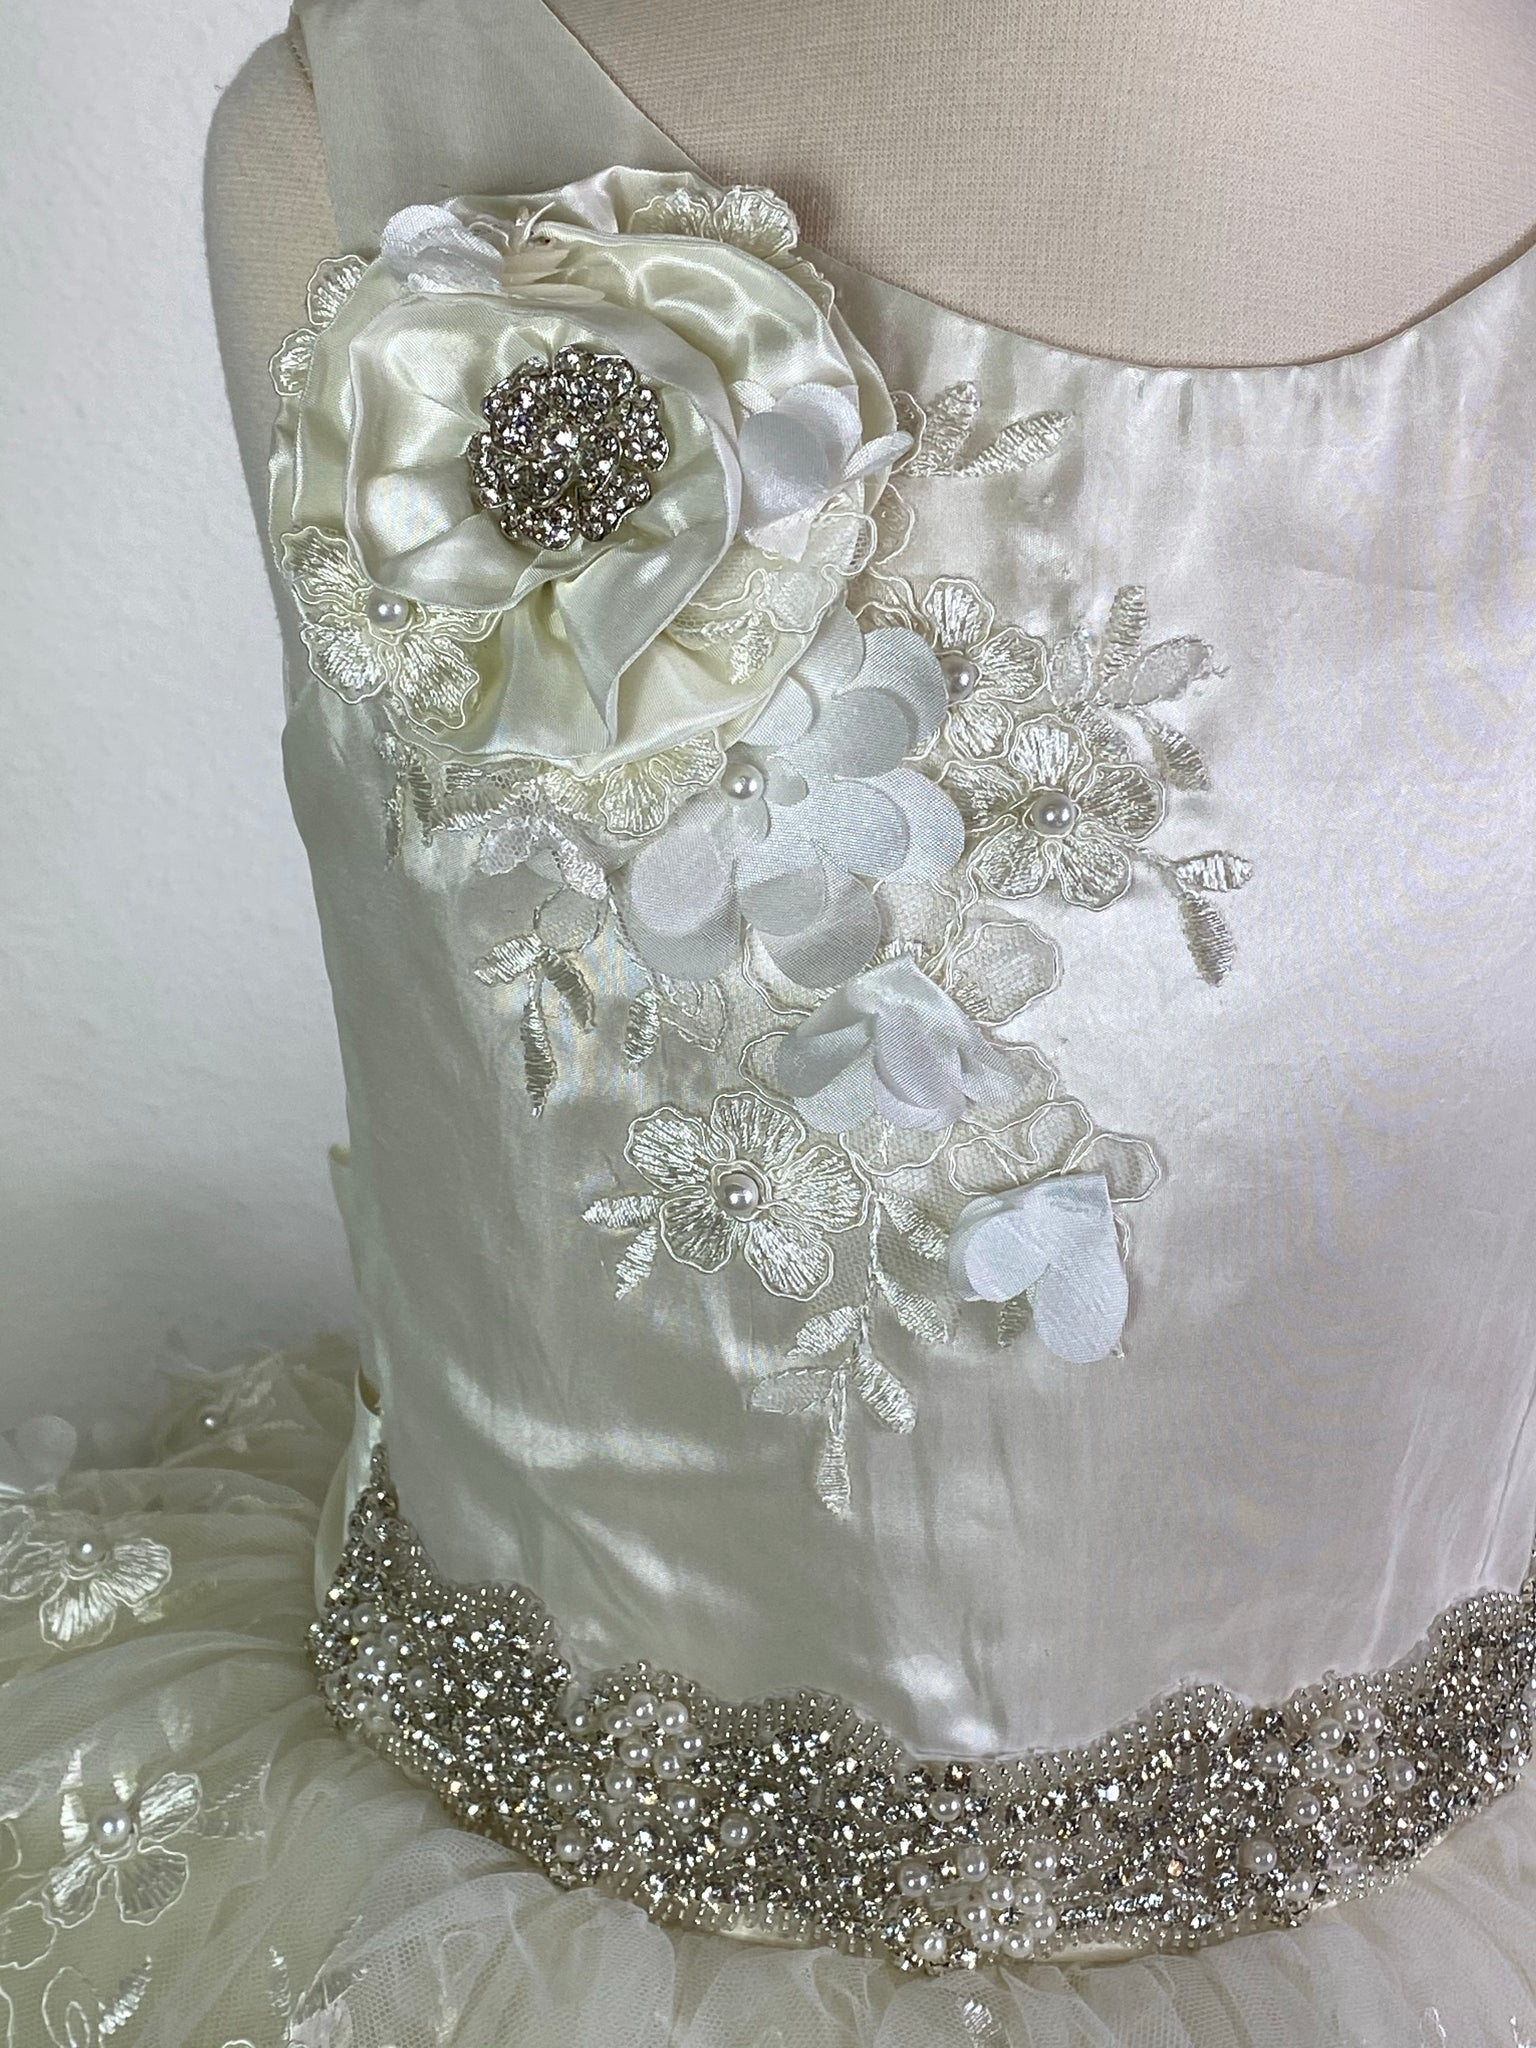 Ivory, size 8 Ivory bodice with large rhinestone flower on shoulder Pearl and rhinestone band along waist Ivory satin skirt with embroidered tulle overlay Pearl button closure Satin Ribbon for large bow